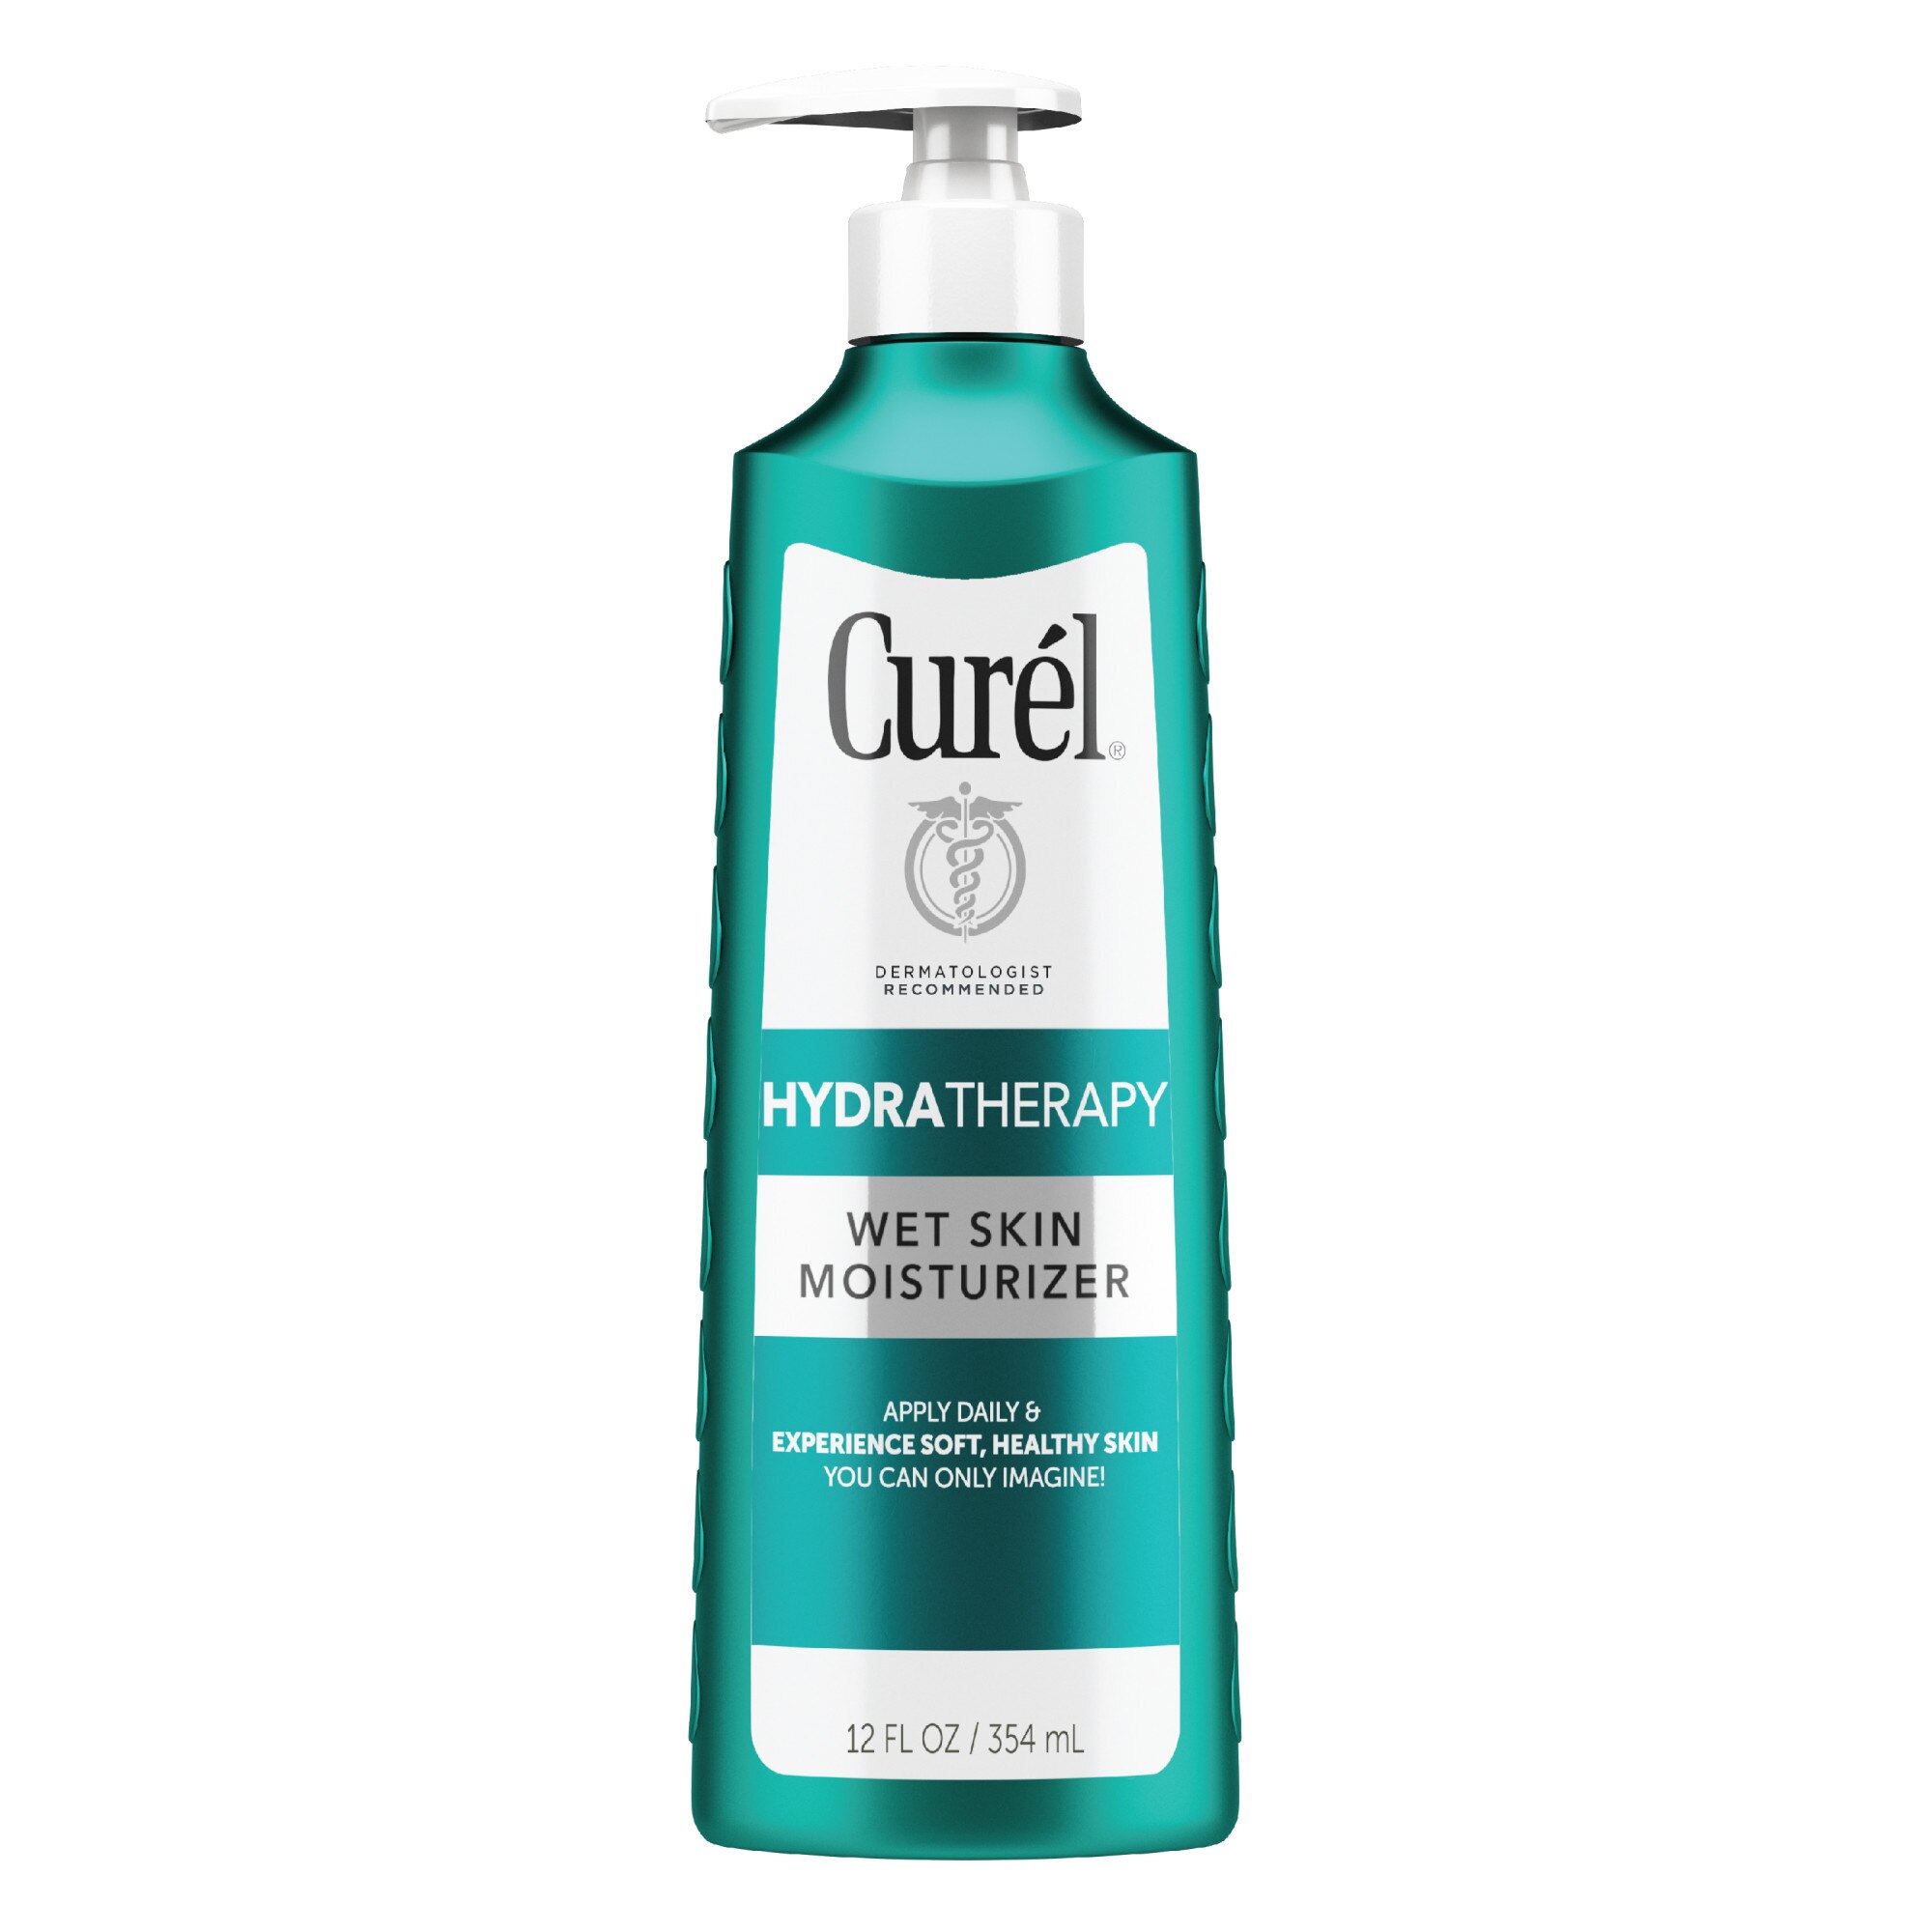 Curel Hydra Therapy In Shower Body Lotion, Wet Skin Moisturizer for Dry or Extra Dry Skin, 12 OZ